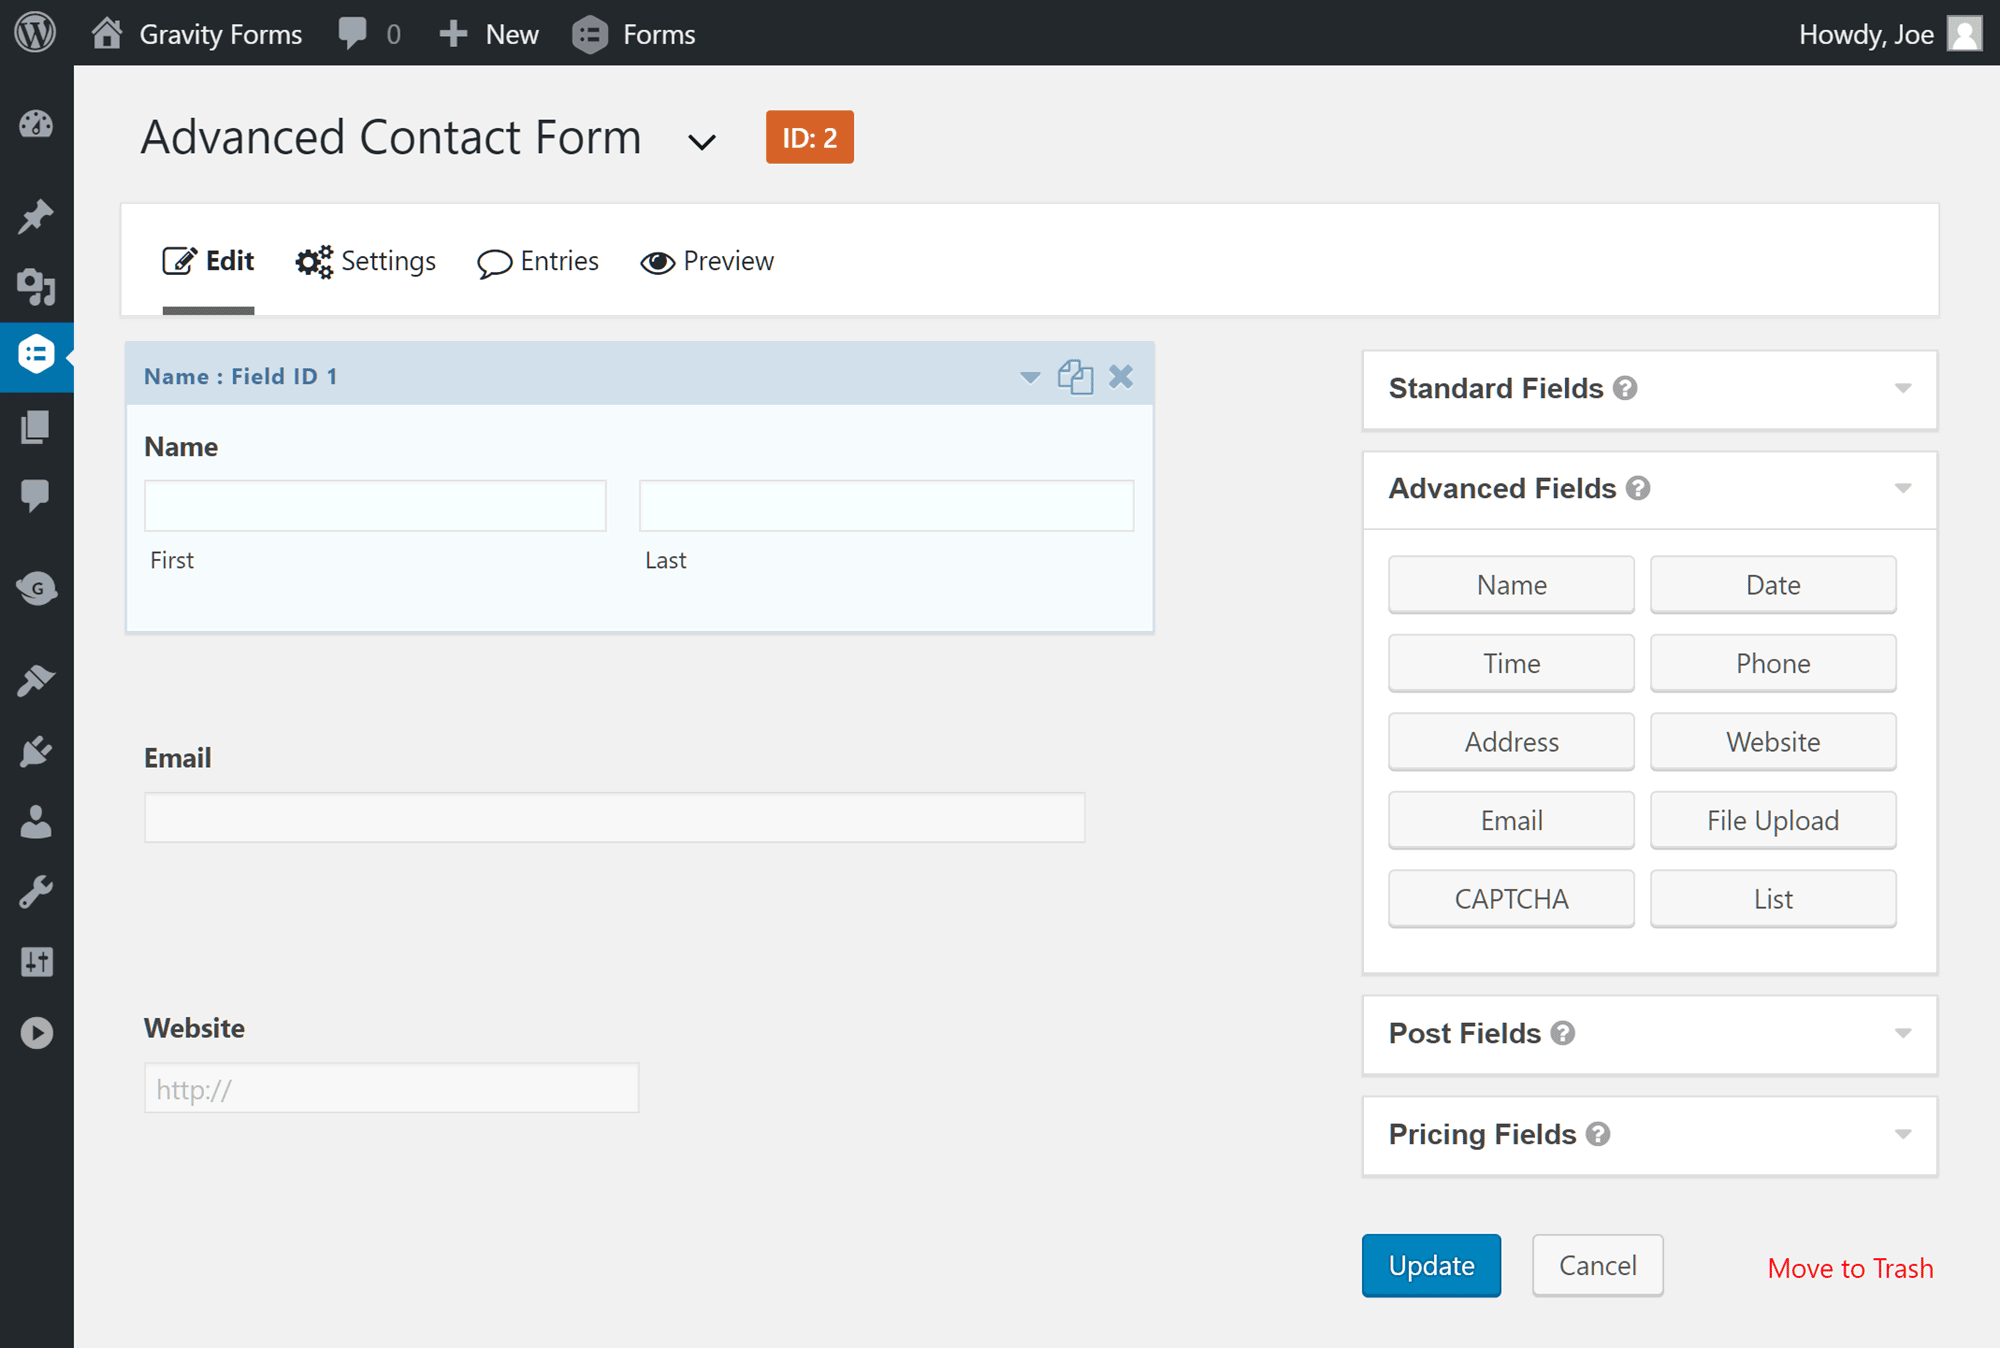 Adding fields to the form